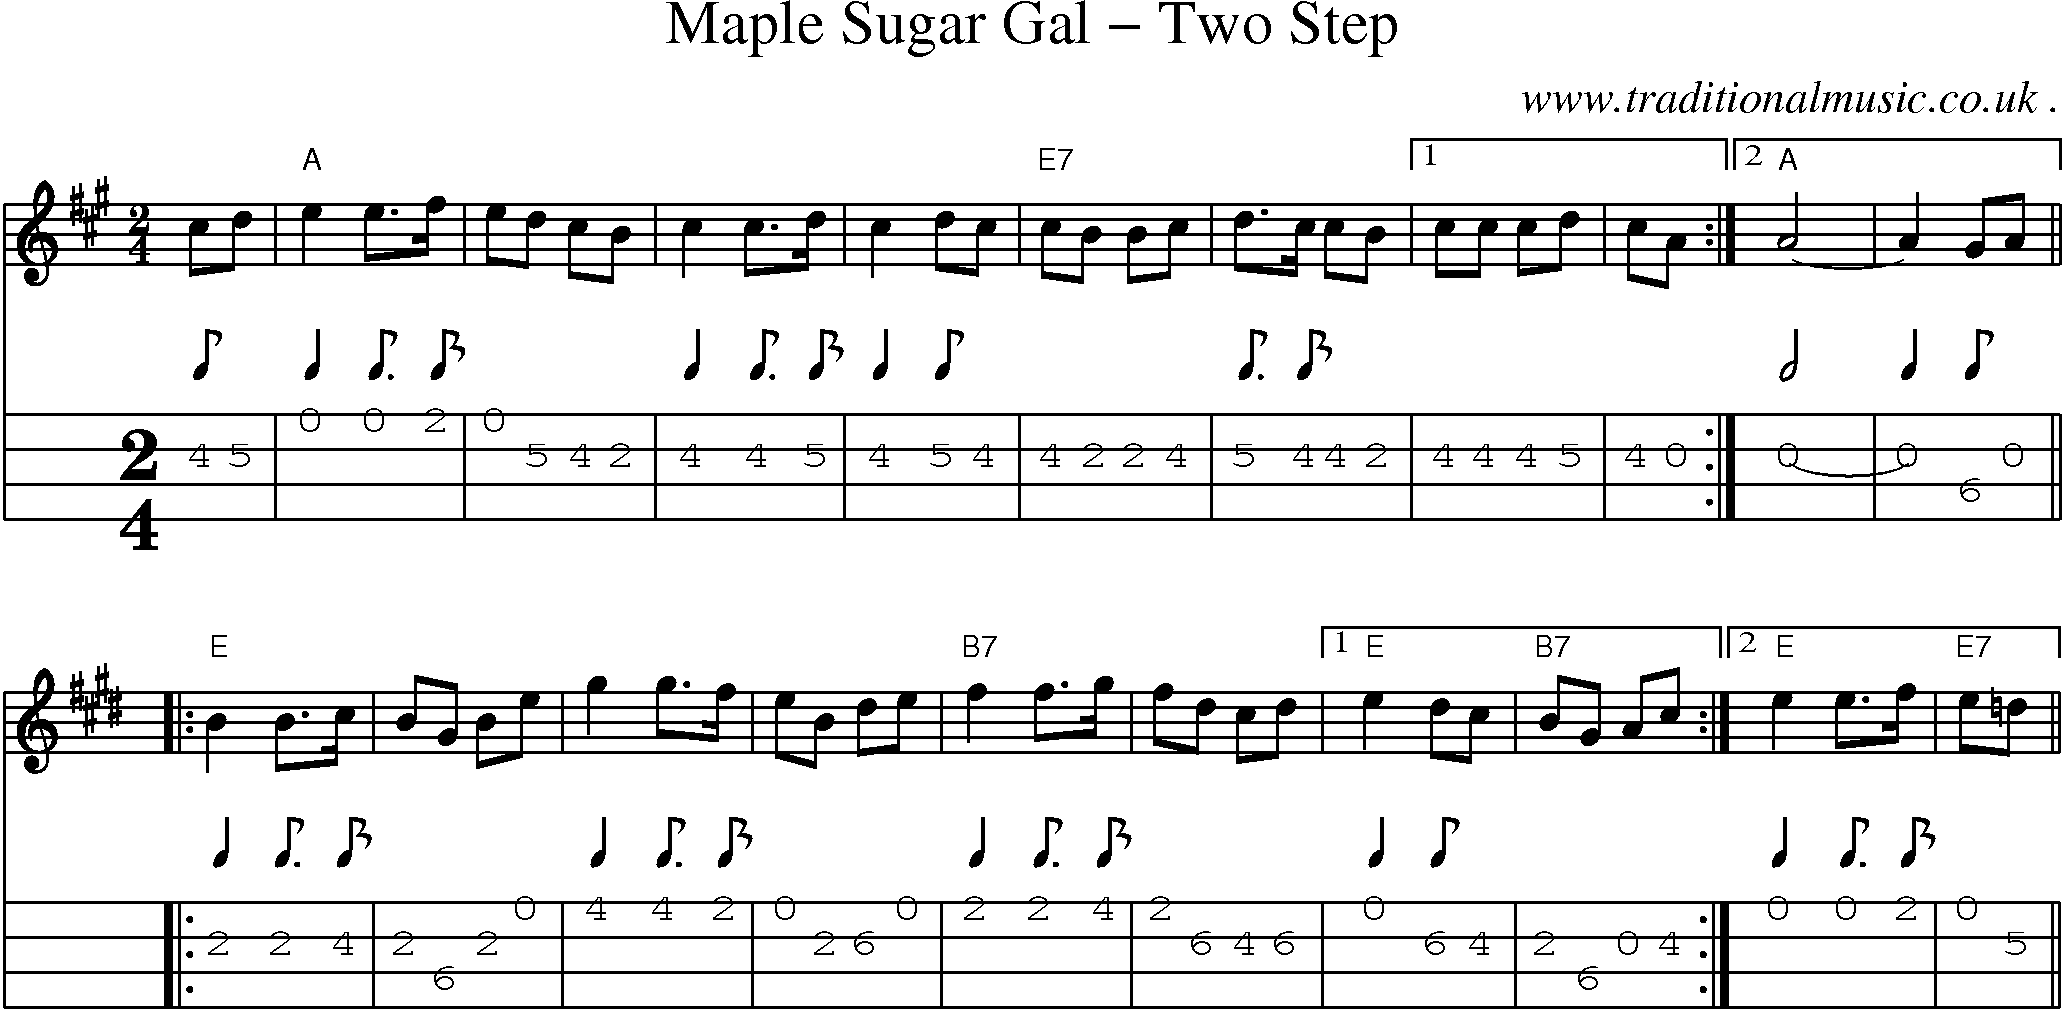 Music Score and Mandolin Tabs for Maple Sugar Gal Two Step